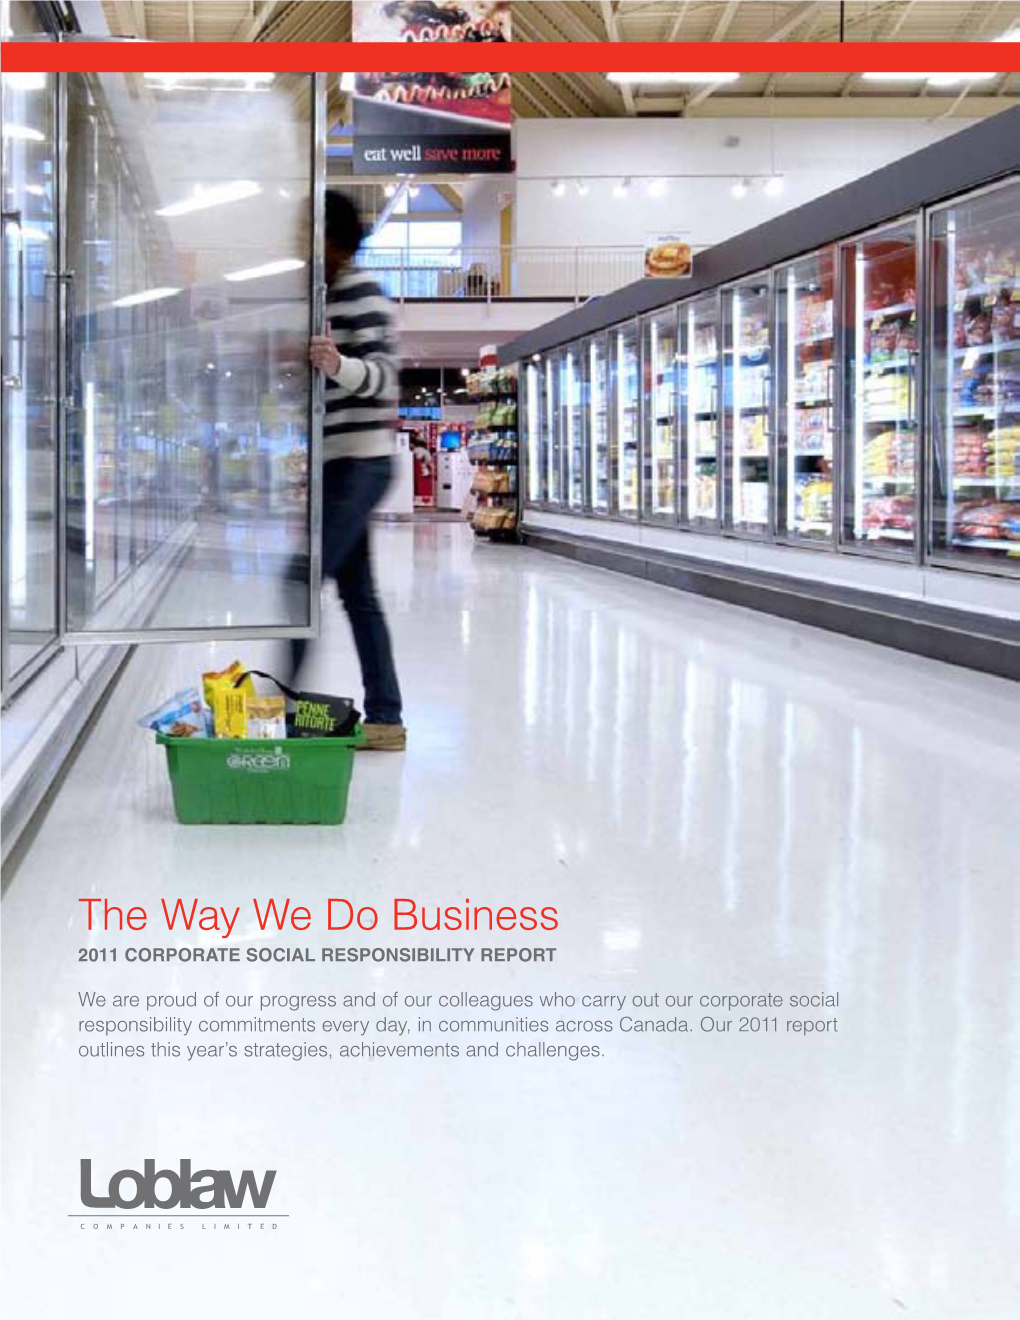 The Way We Do Business 2011 Corporate Social Responsibility Report